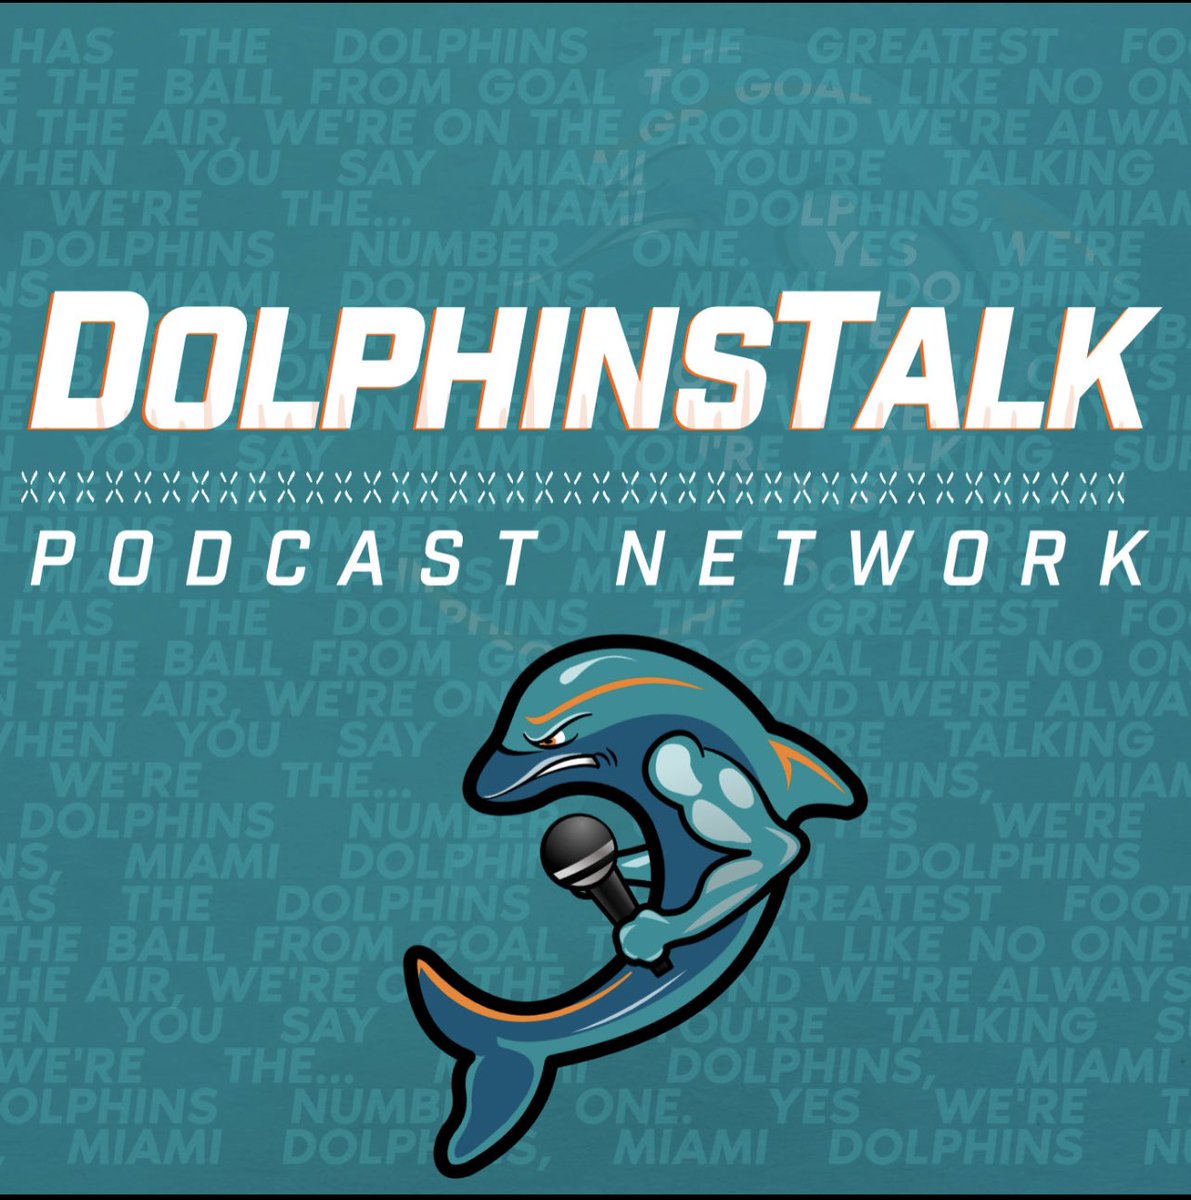 My guy Mike Oliva @DolphinsTalk joined me to discuss @MiamiDolphins and the AFC east @BuffaloBills @nyjets @Patriots @SRod021 #jets #BuffaloBills #patriots open.spotify.com/episode/2rAsIe… podcasts.apple.com/us/podcast/the…